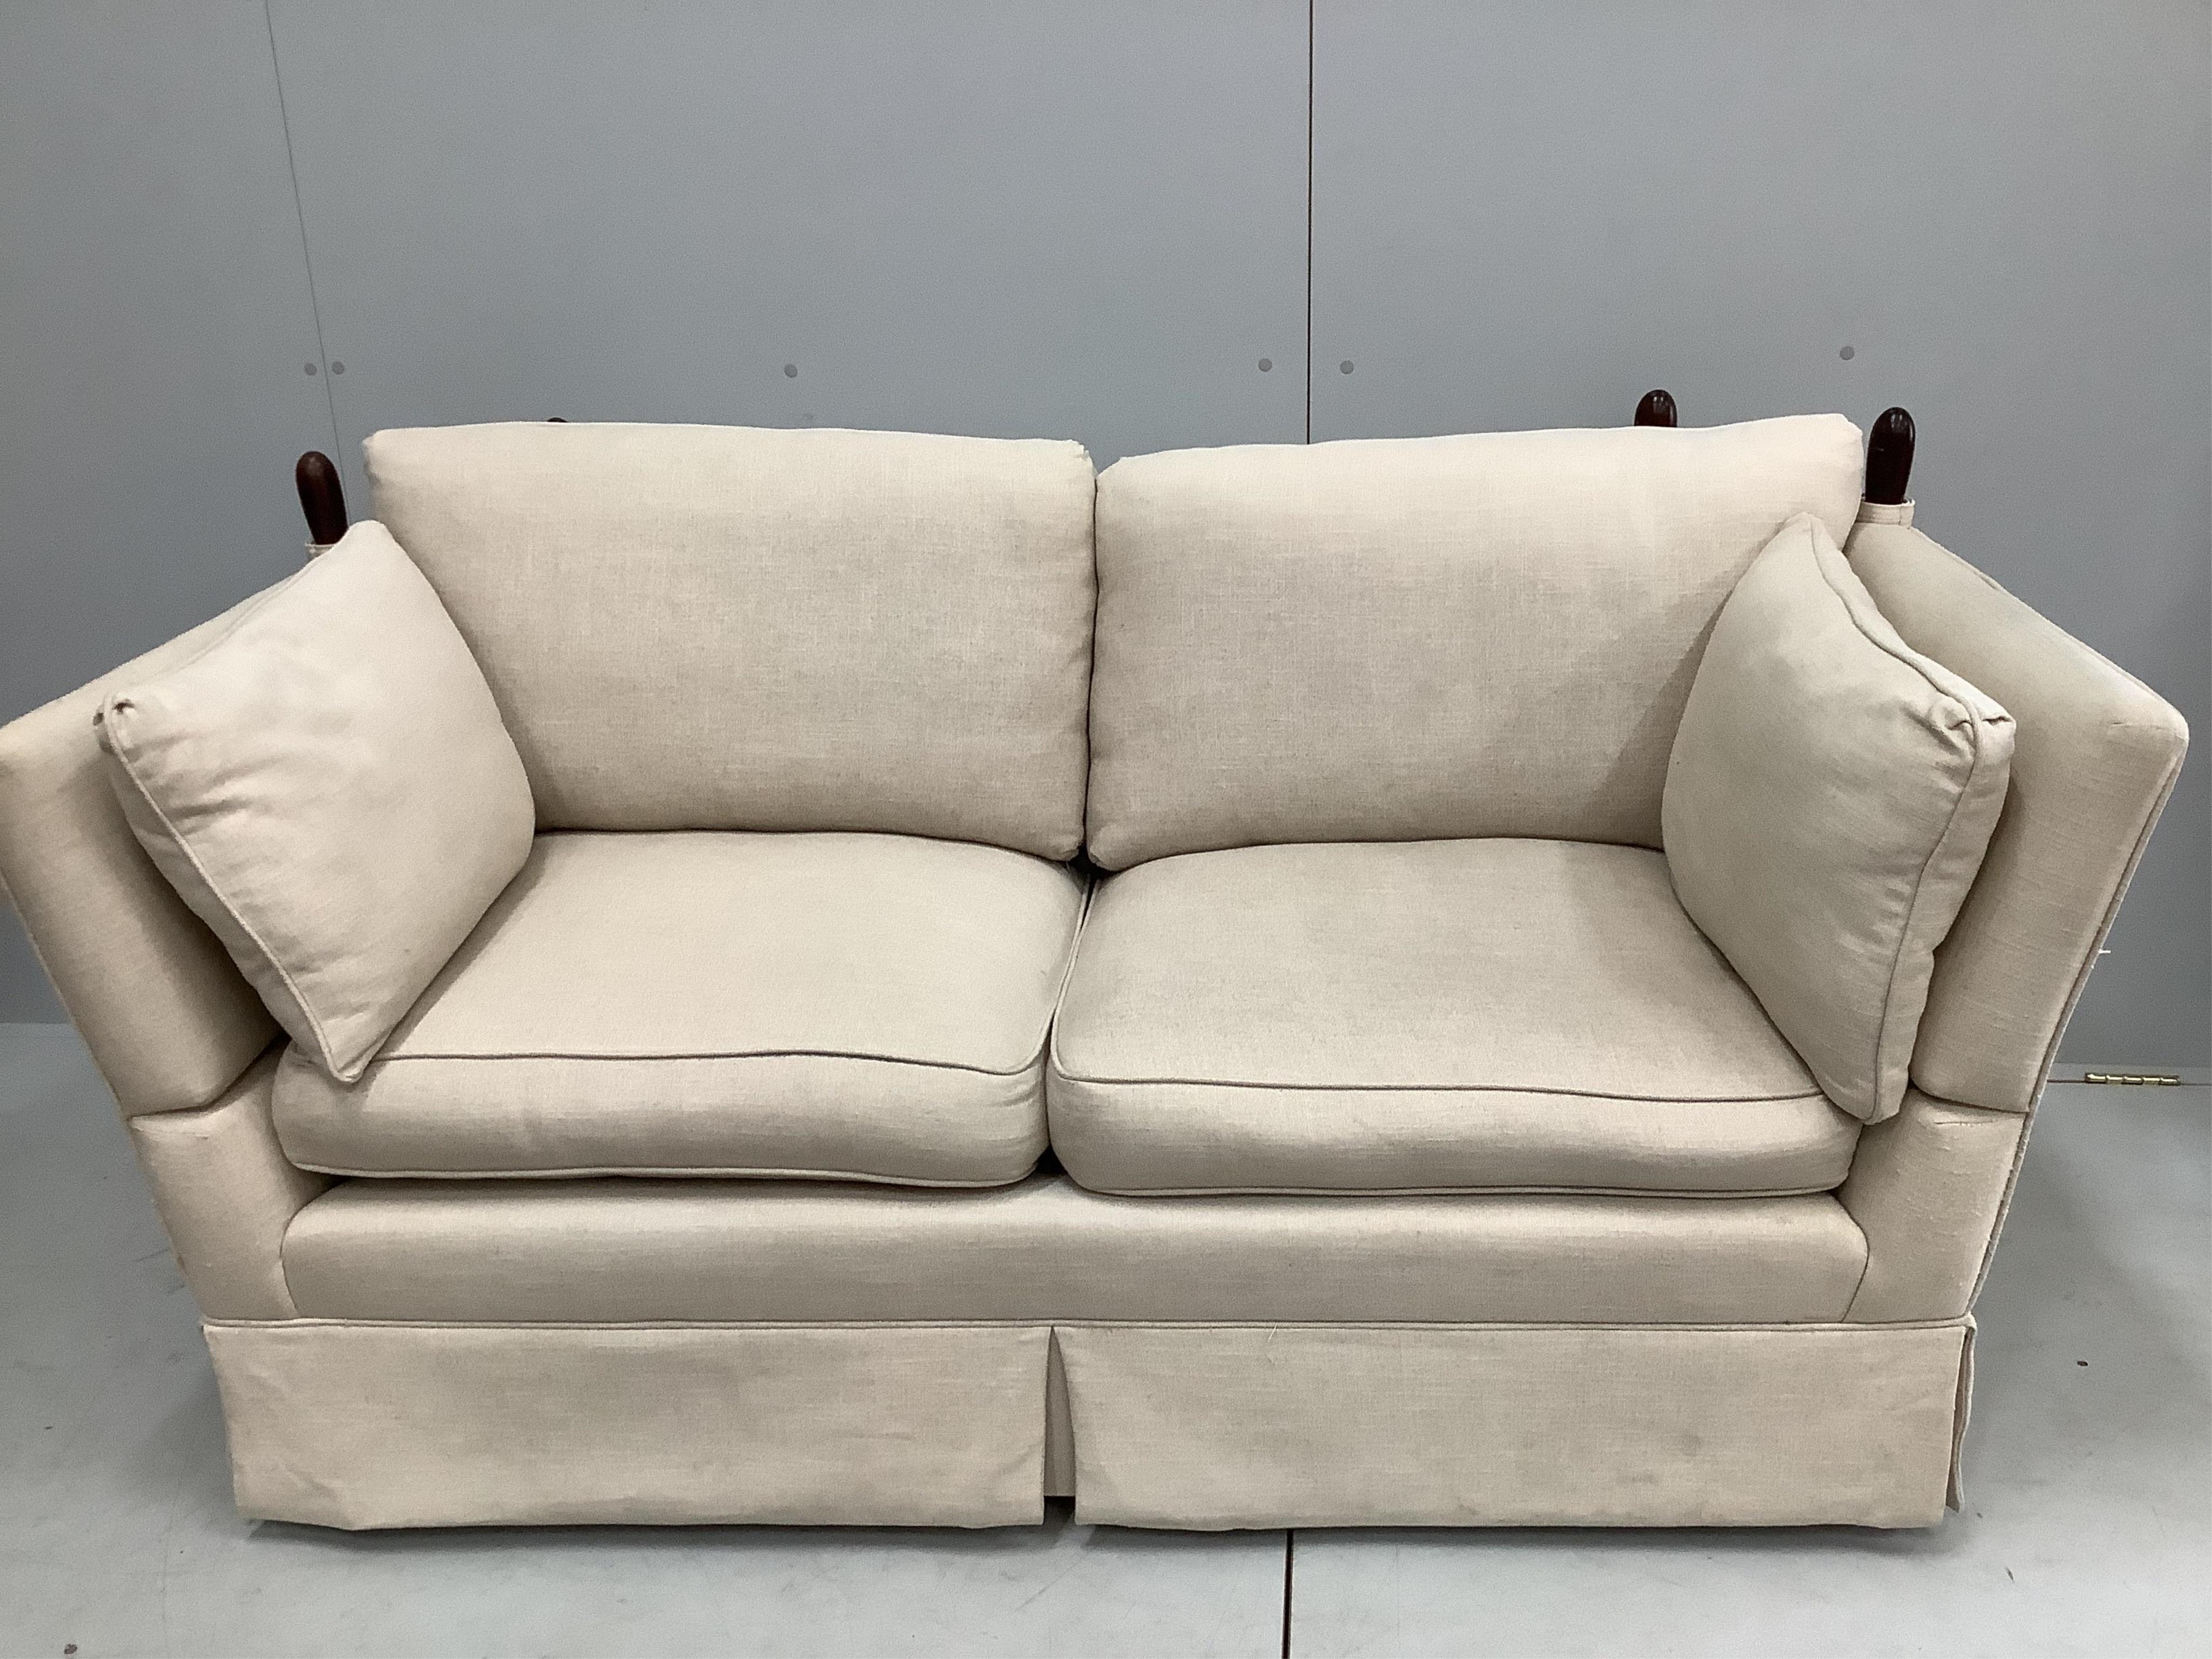 A small Contemporary Knowle settee upholstered in a natural linen fabric, width 170cm, depth 84cm, height 85cm. Condition - good